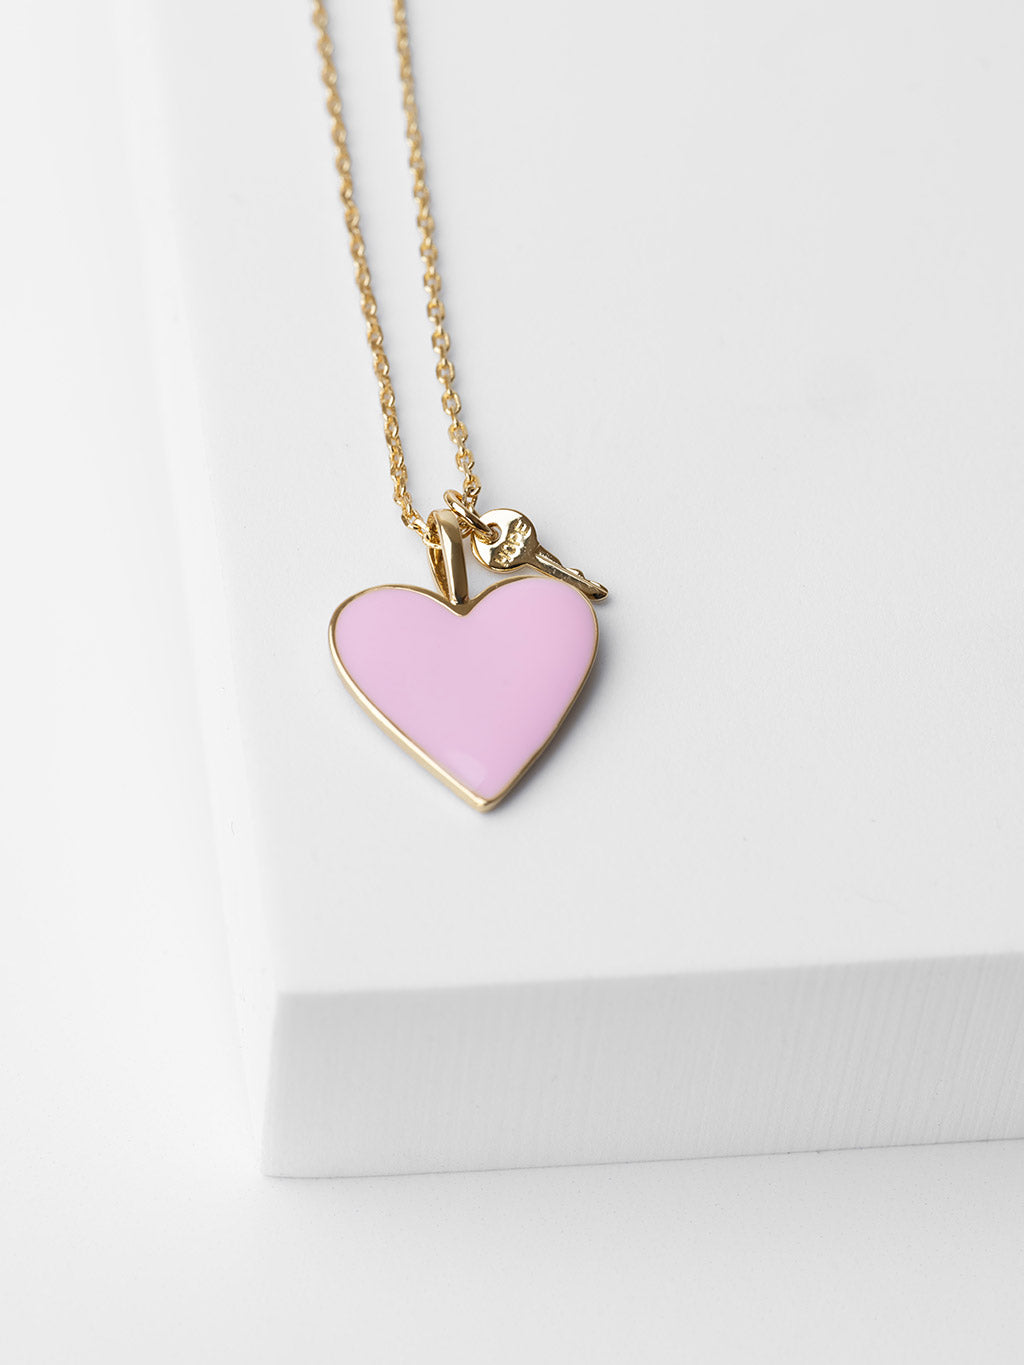 Pink Enamel Heart and Mini Key Necklace Necklaces The Giving Keys HOPE 